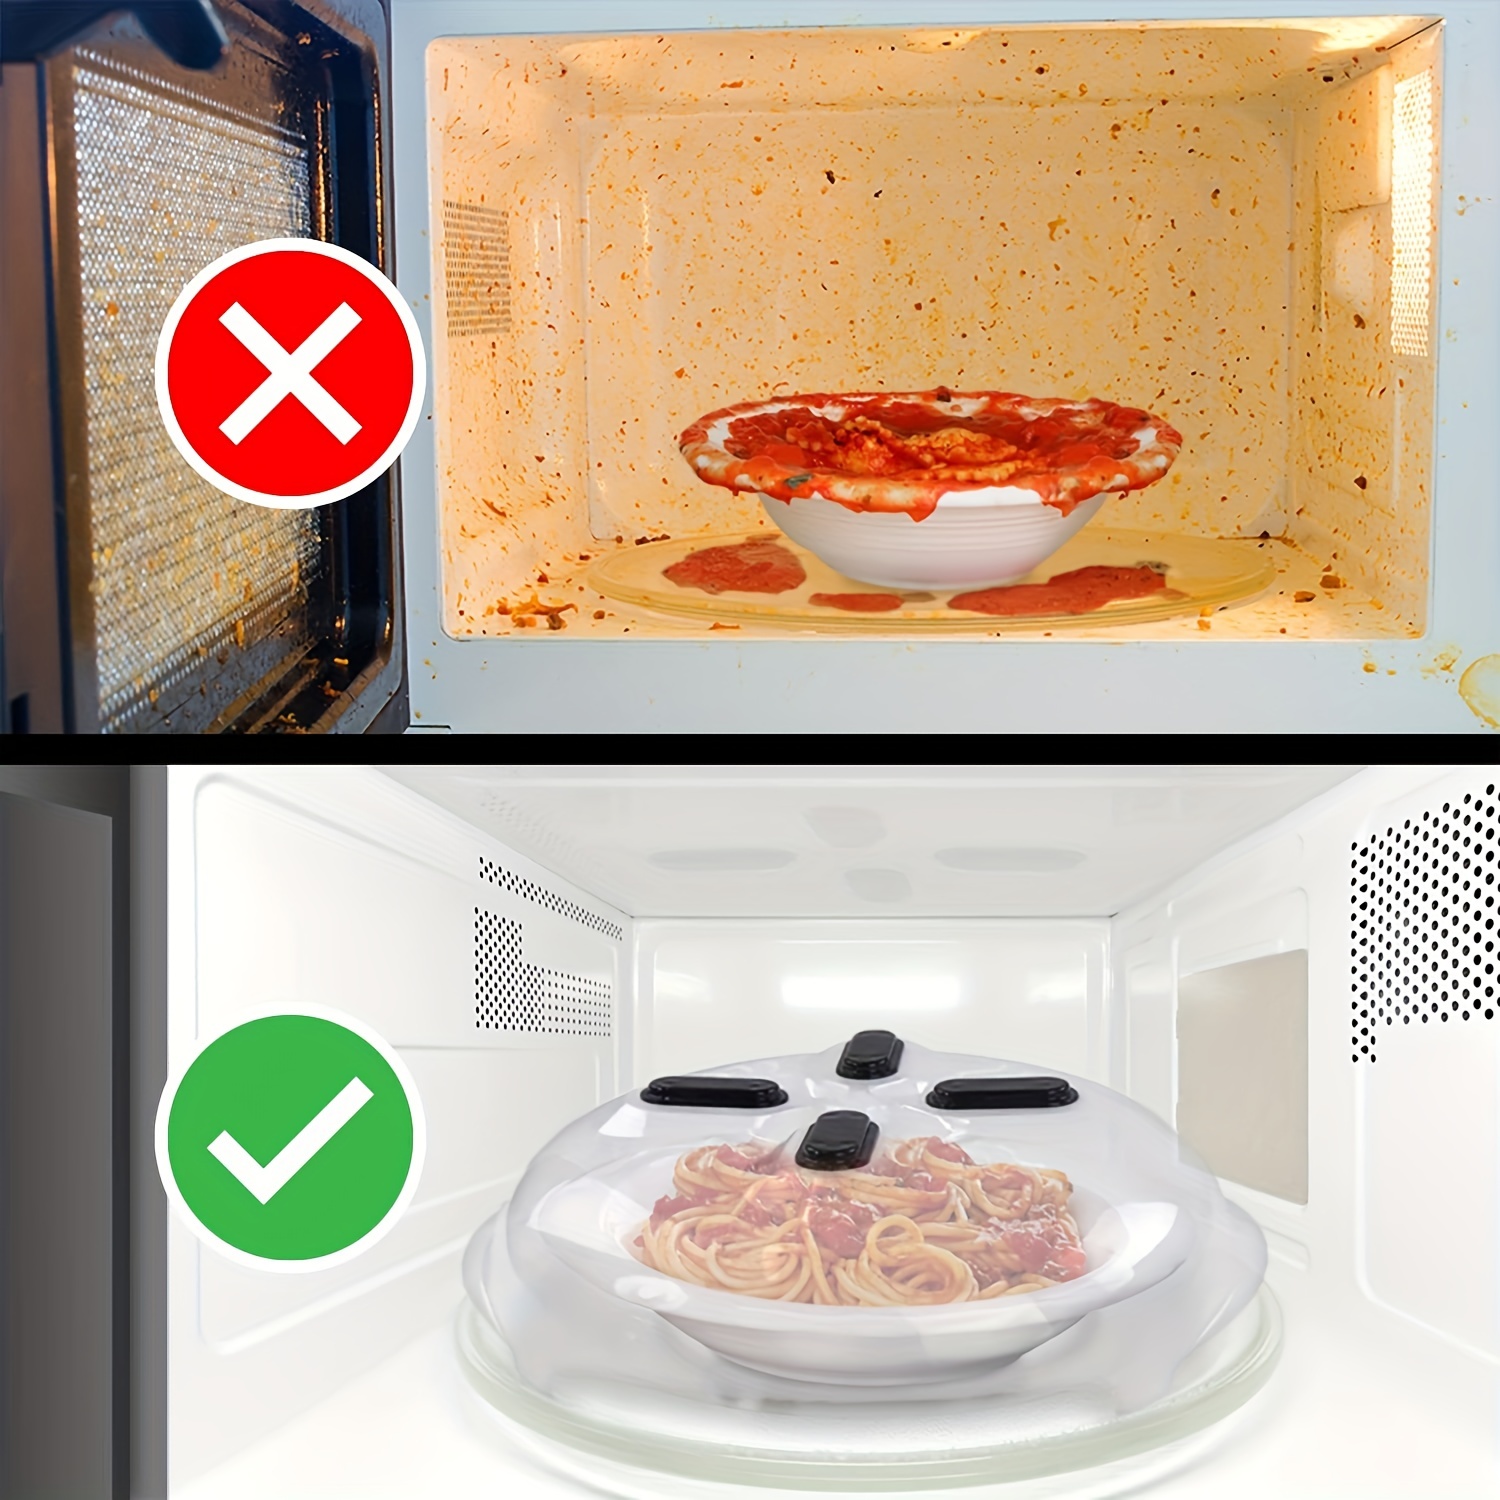 New Microwave Cover Splatter Guard Magnetic Folding Lid